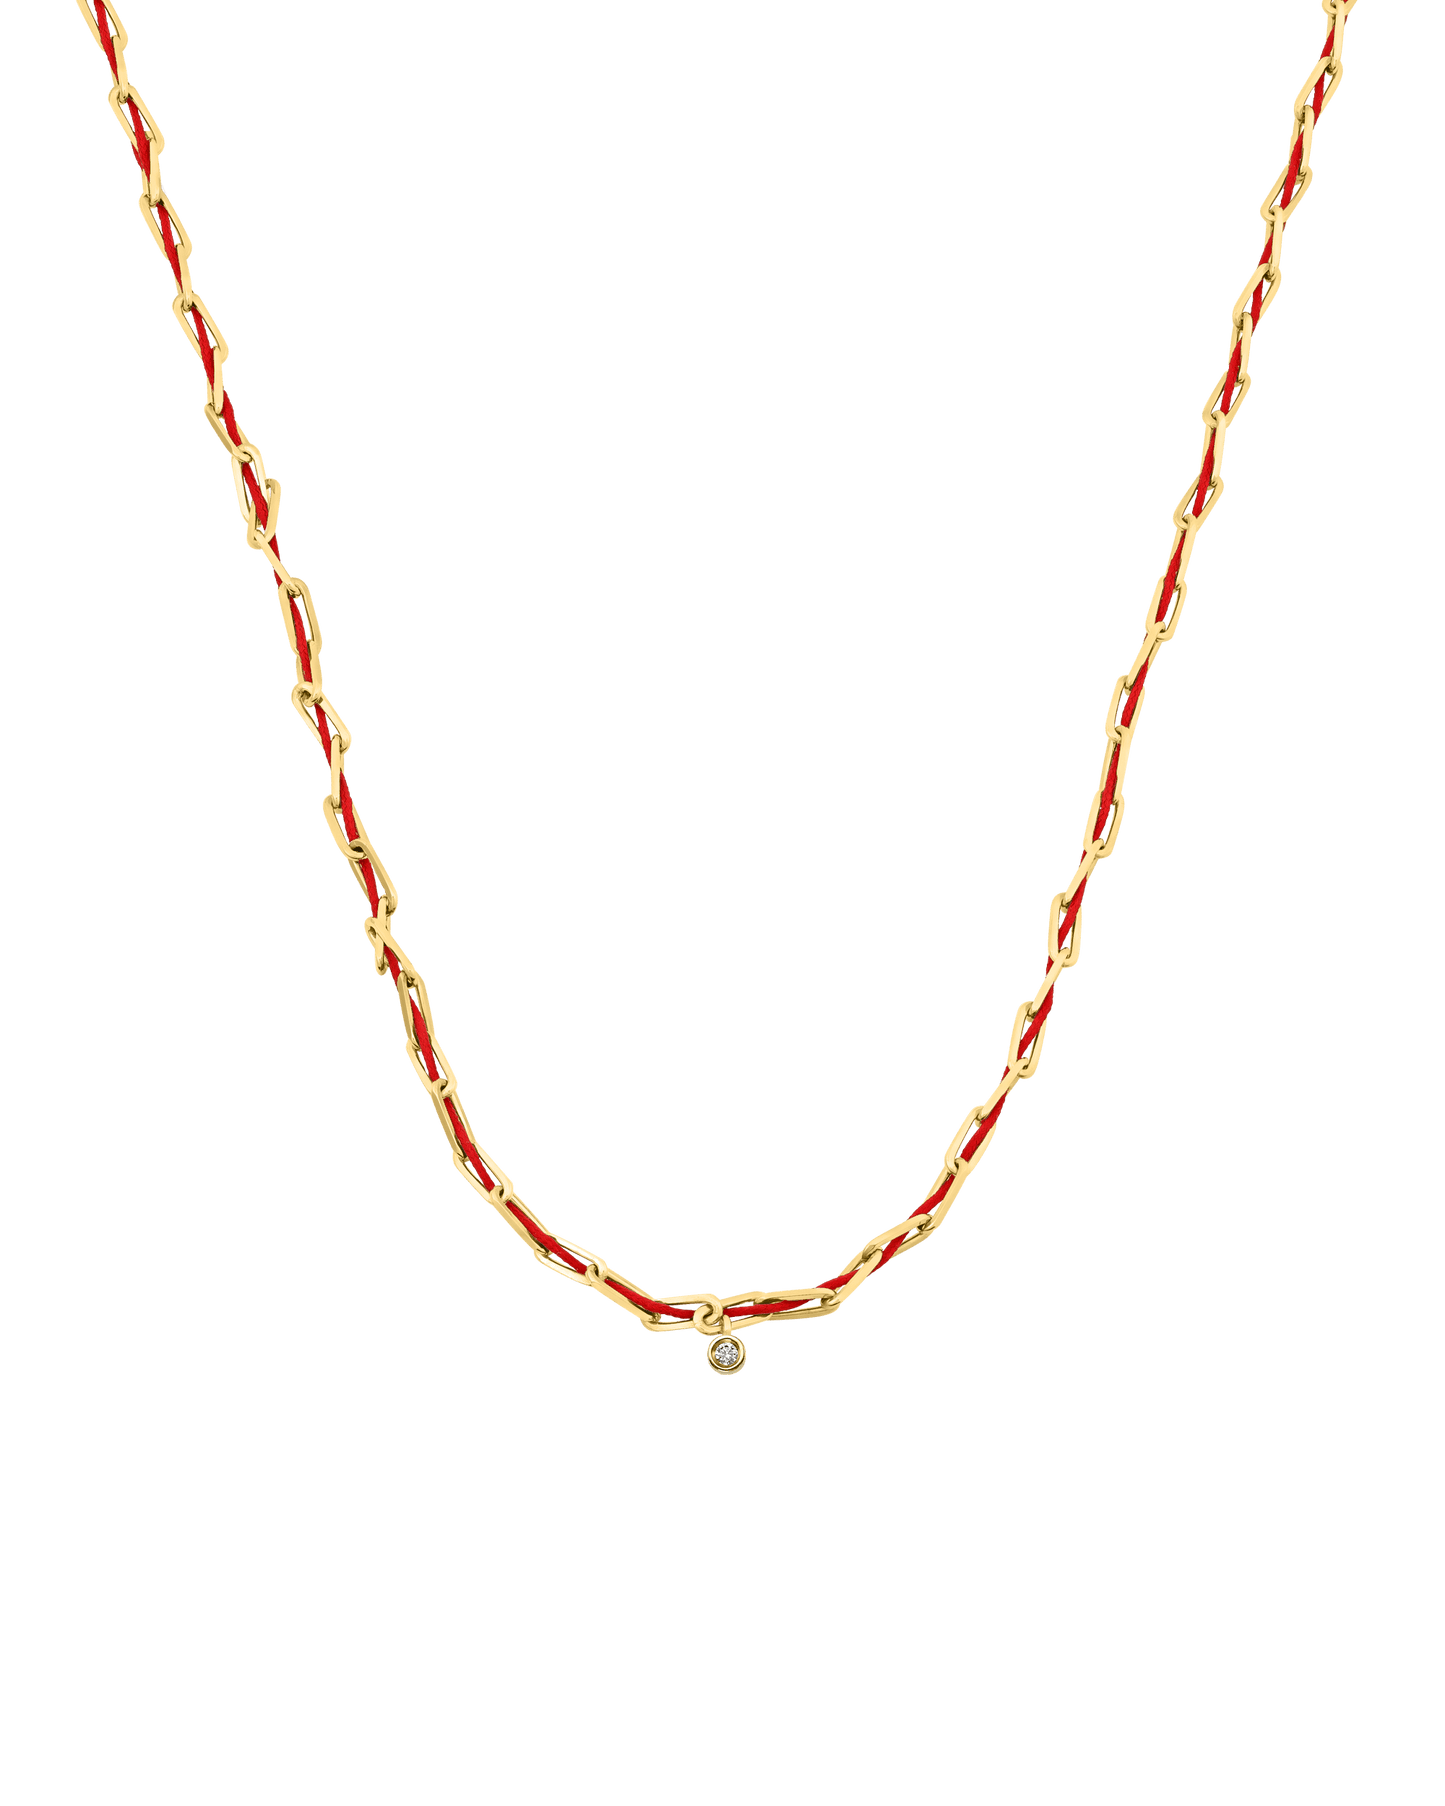 Twine Diamond Necklace - 18K Gold Vermeil Necklaces magal-dev Red Small: 0.03ct 16"